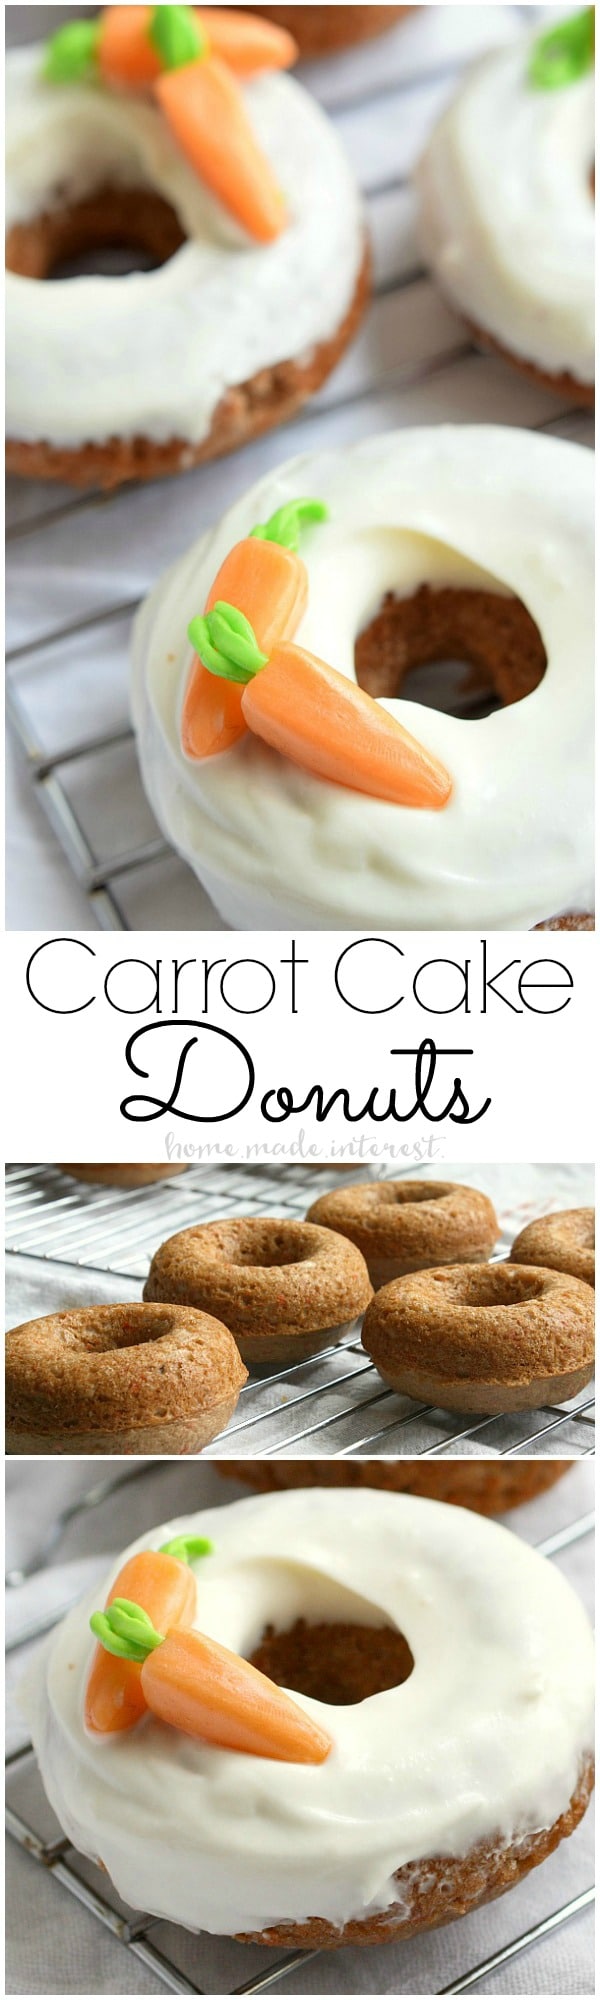 Baked Carrot Cake Donuts | These baked Carrot Cake donuts are frosted with a cream cheese glaze and topped with edible carrots. It is one of the best Easter brunch recipes or Easter dessert recipes. These carrot cake donuts are made with a boxed cake mix and are so easy to make! If you’re looking for a sweet Easter brunch recipe you have to try these. 